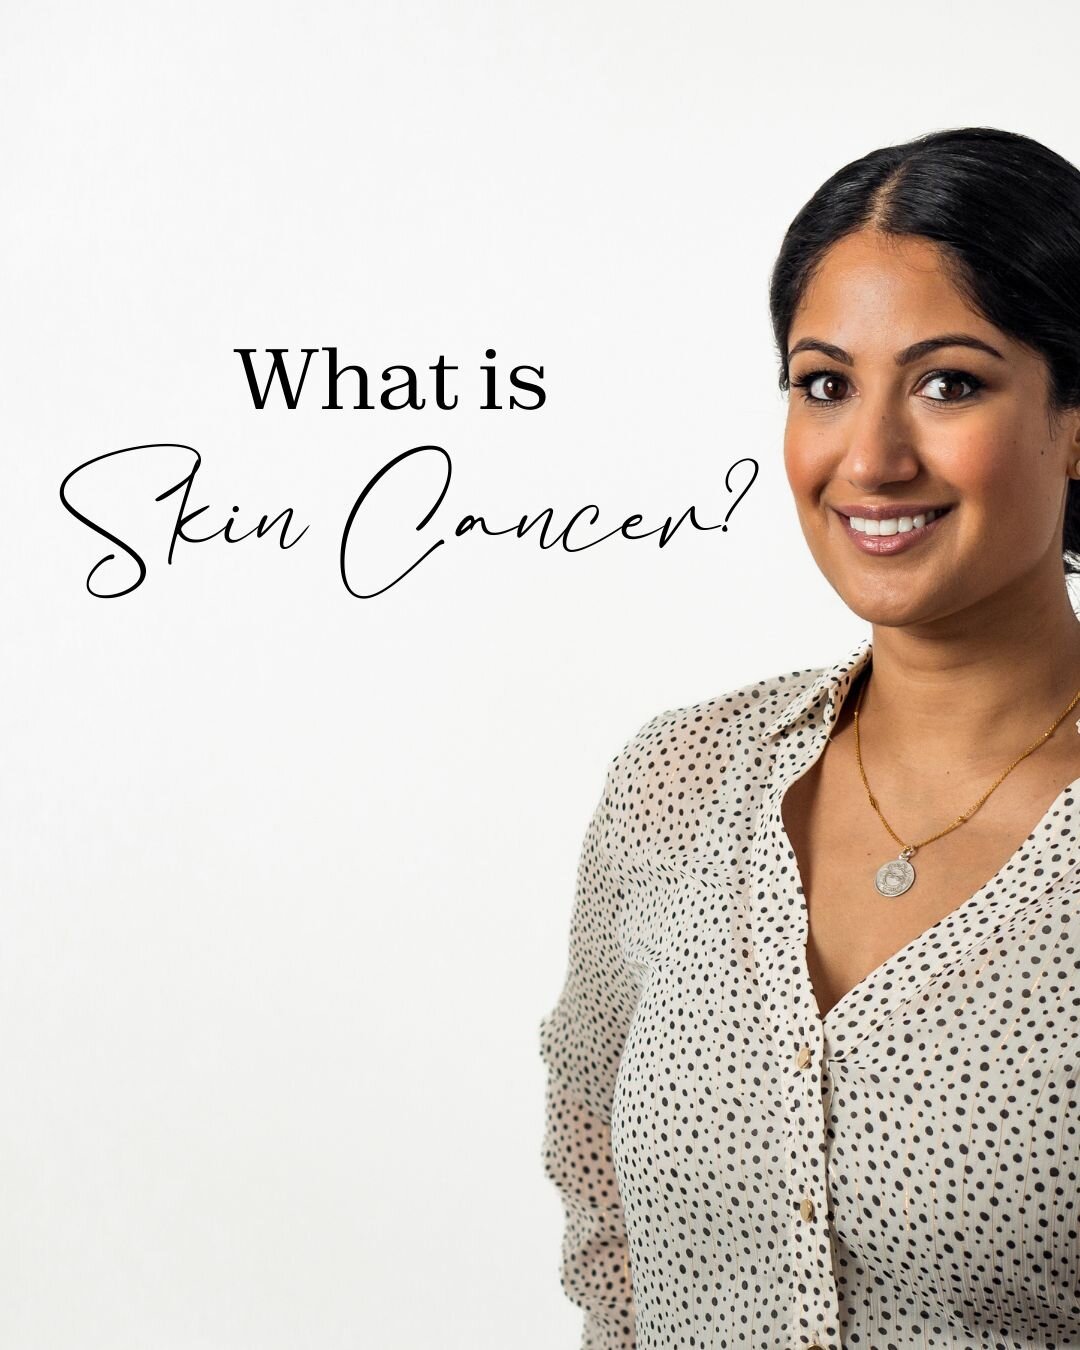 The basics about skin cancer - What you need to know

#doctoramiee #skincancerawareness #skinhealthatters #protectyourskin #healthyskinjourney #sunsmartchoices #loveyourskin #sunprotectionmatters
#skincancerprevention #UVprotection #skincanceraware #